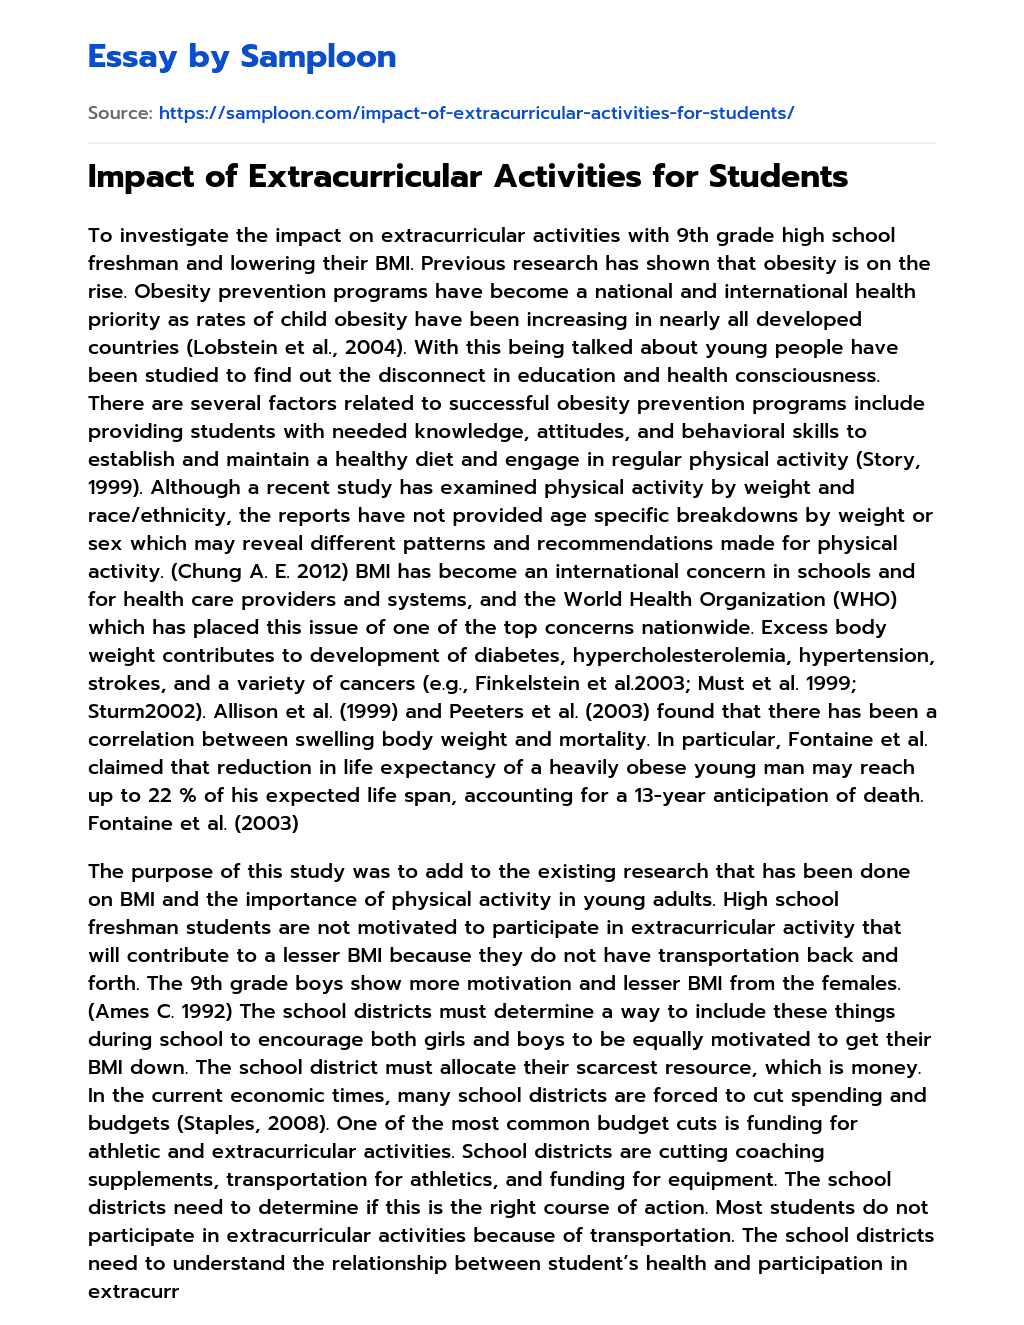 essay on importance of extracurricular activities in school